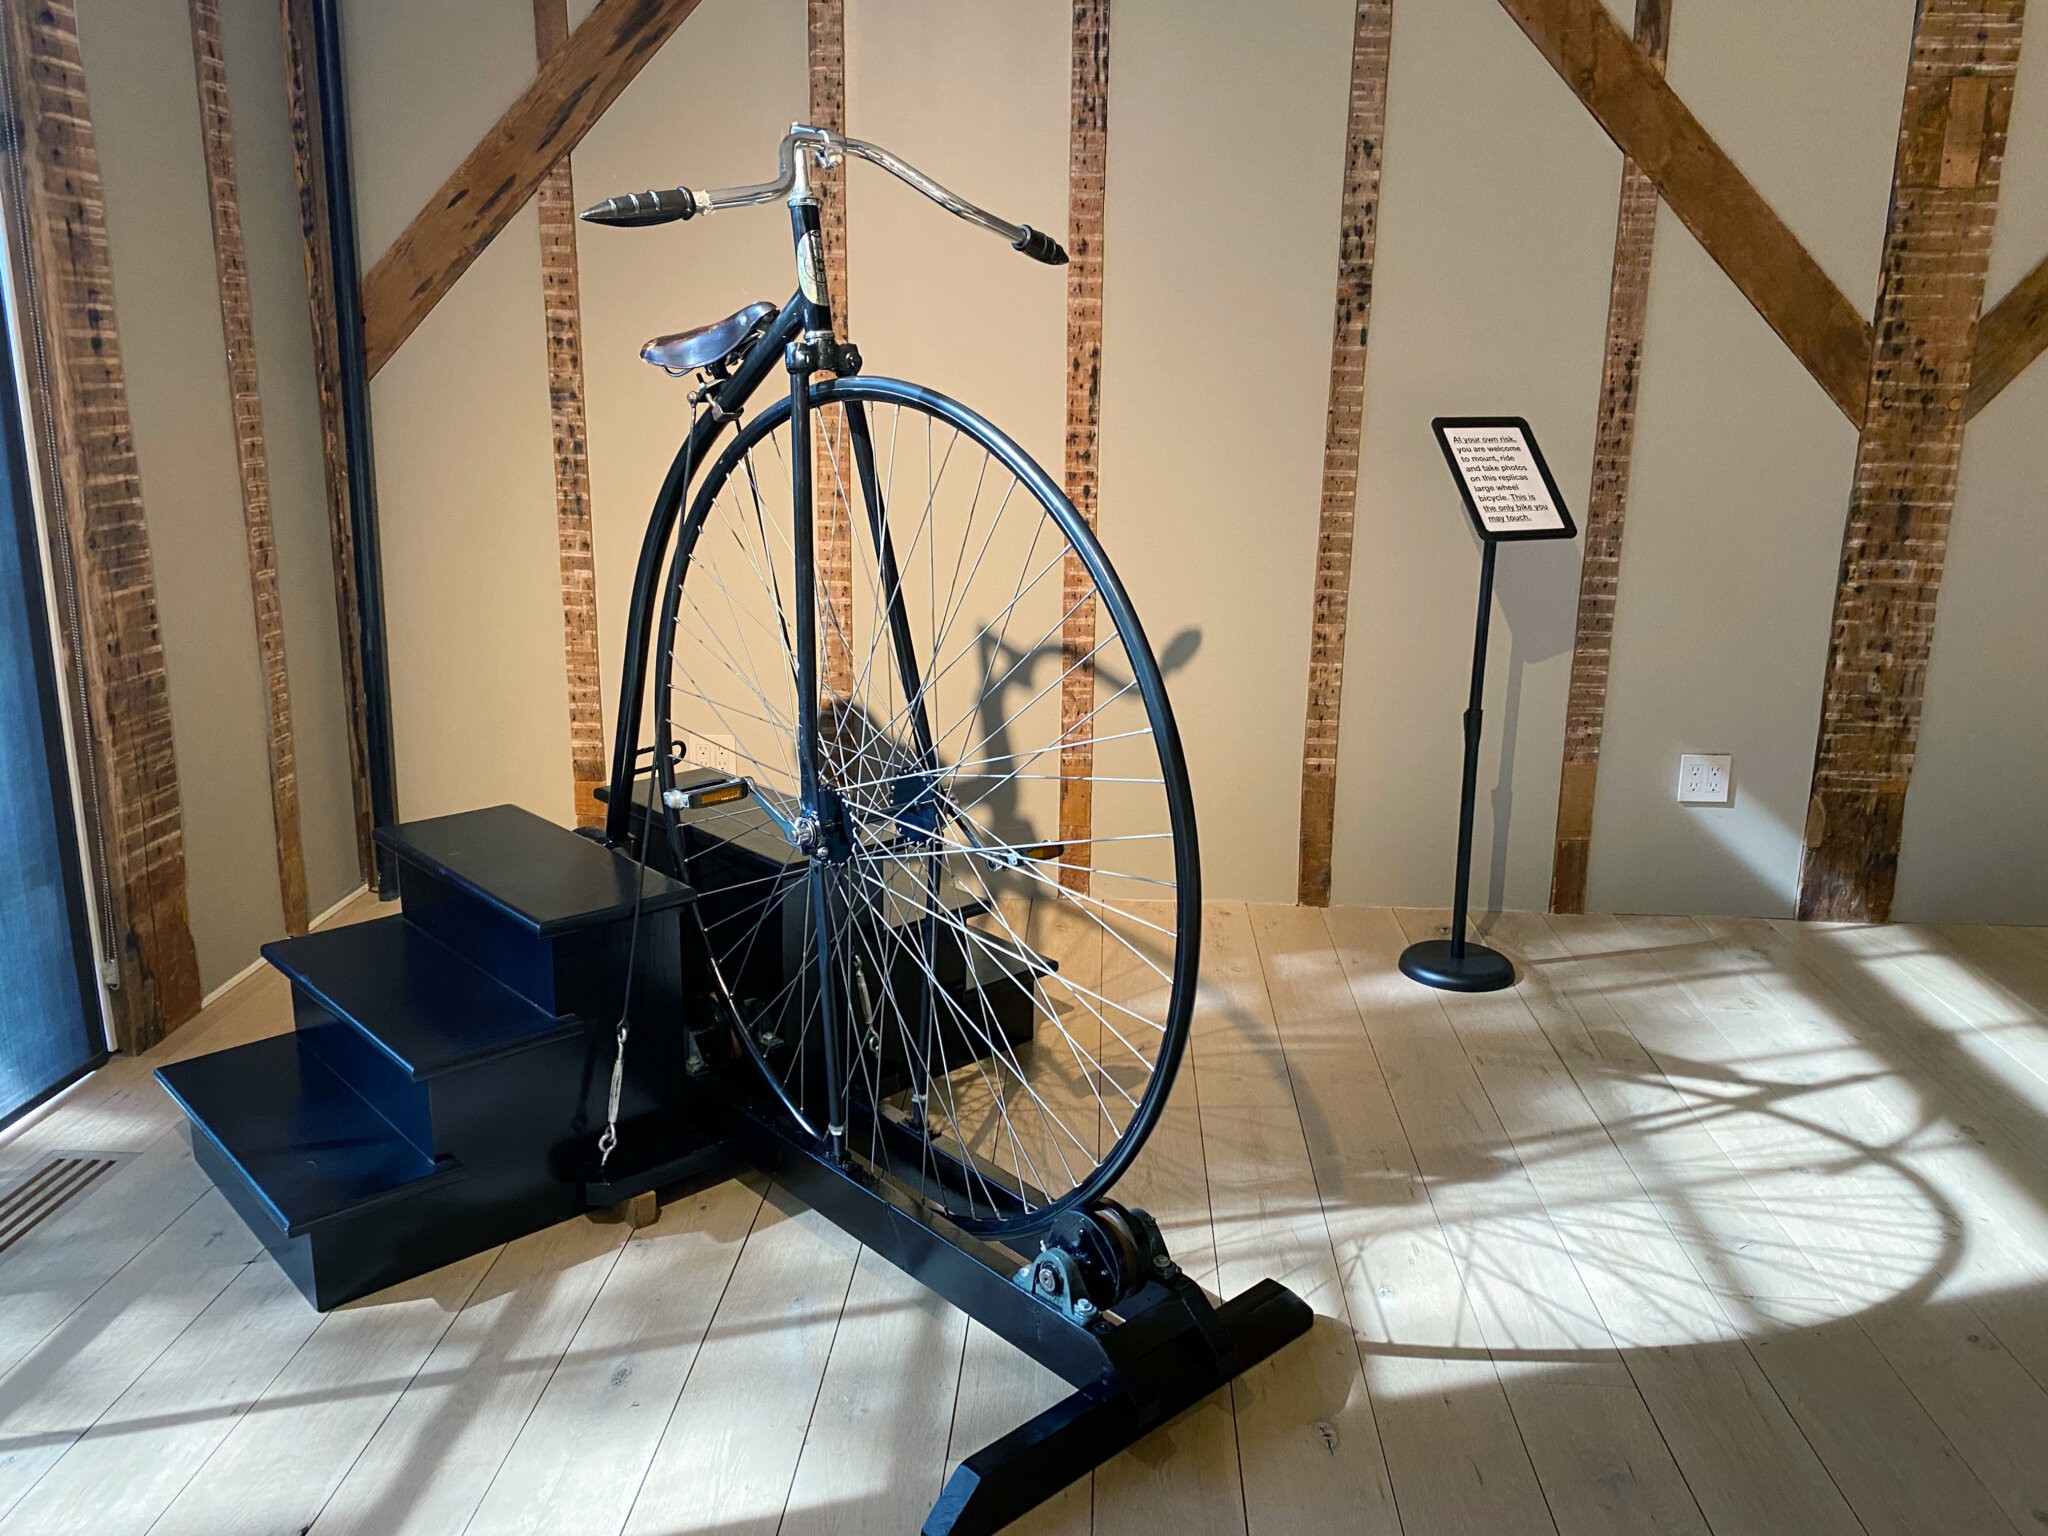 Replica 1880-90s Penny-farthing or High-wheel bicycle at The Church in Sag Harbor